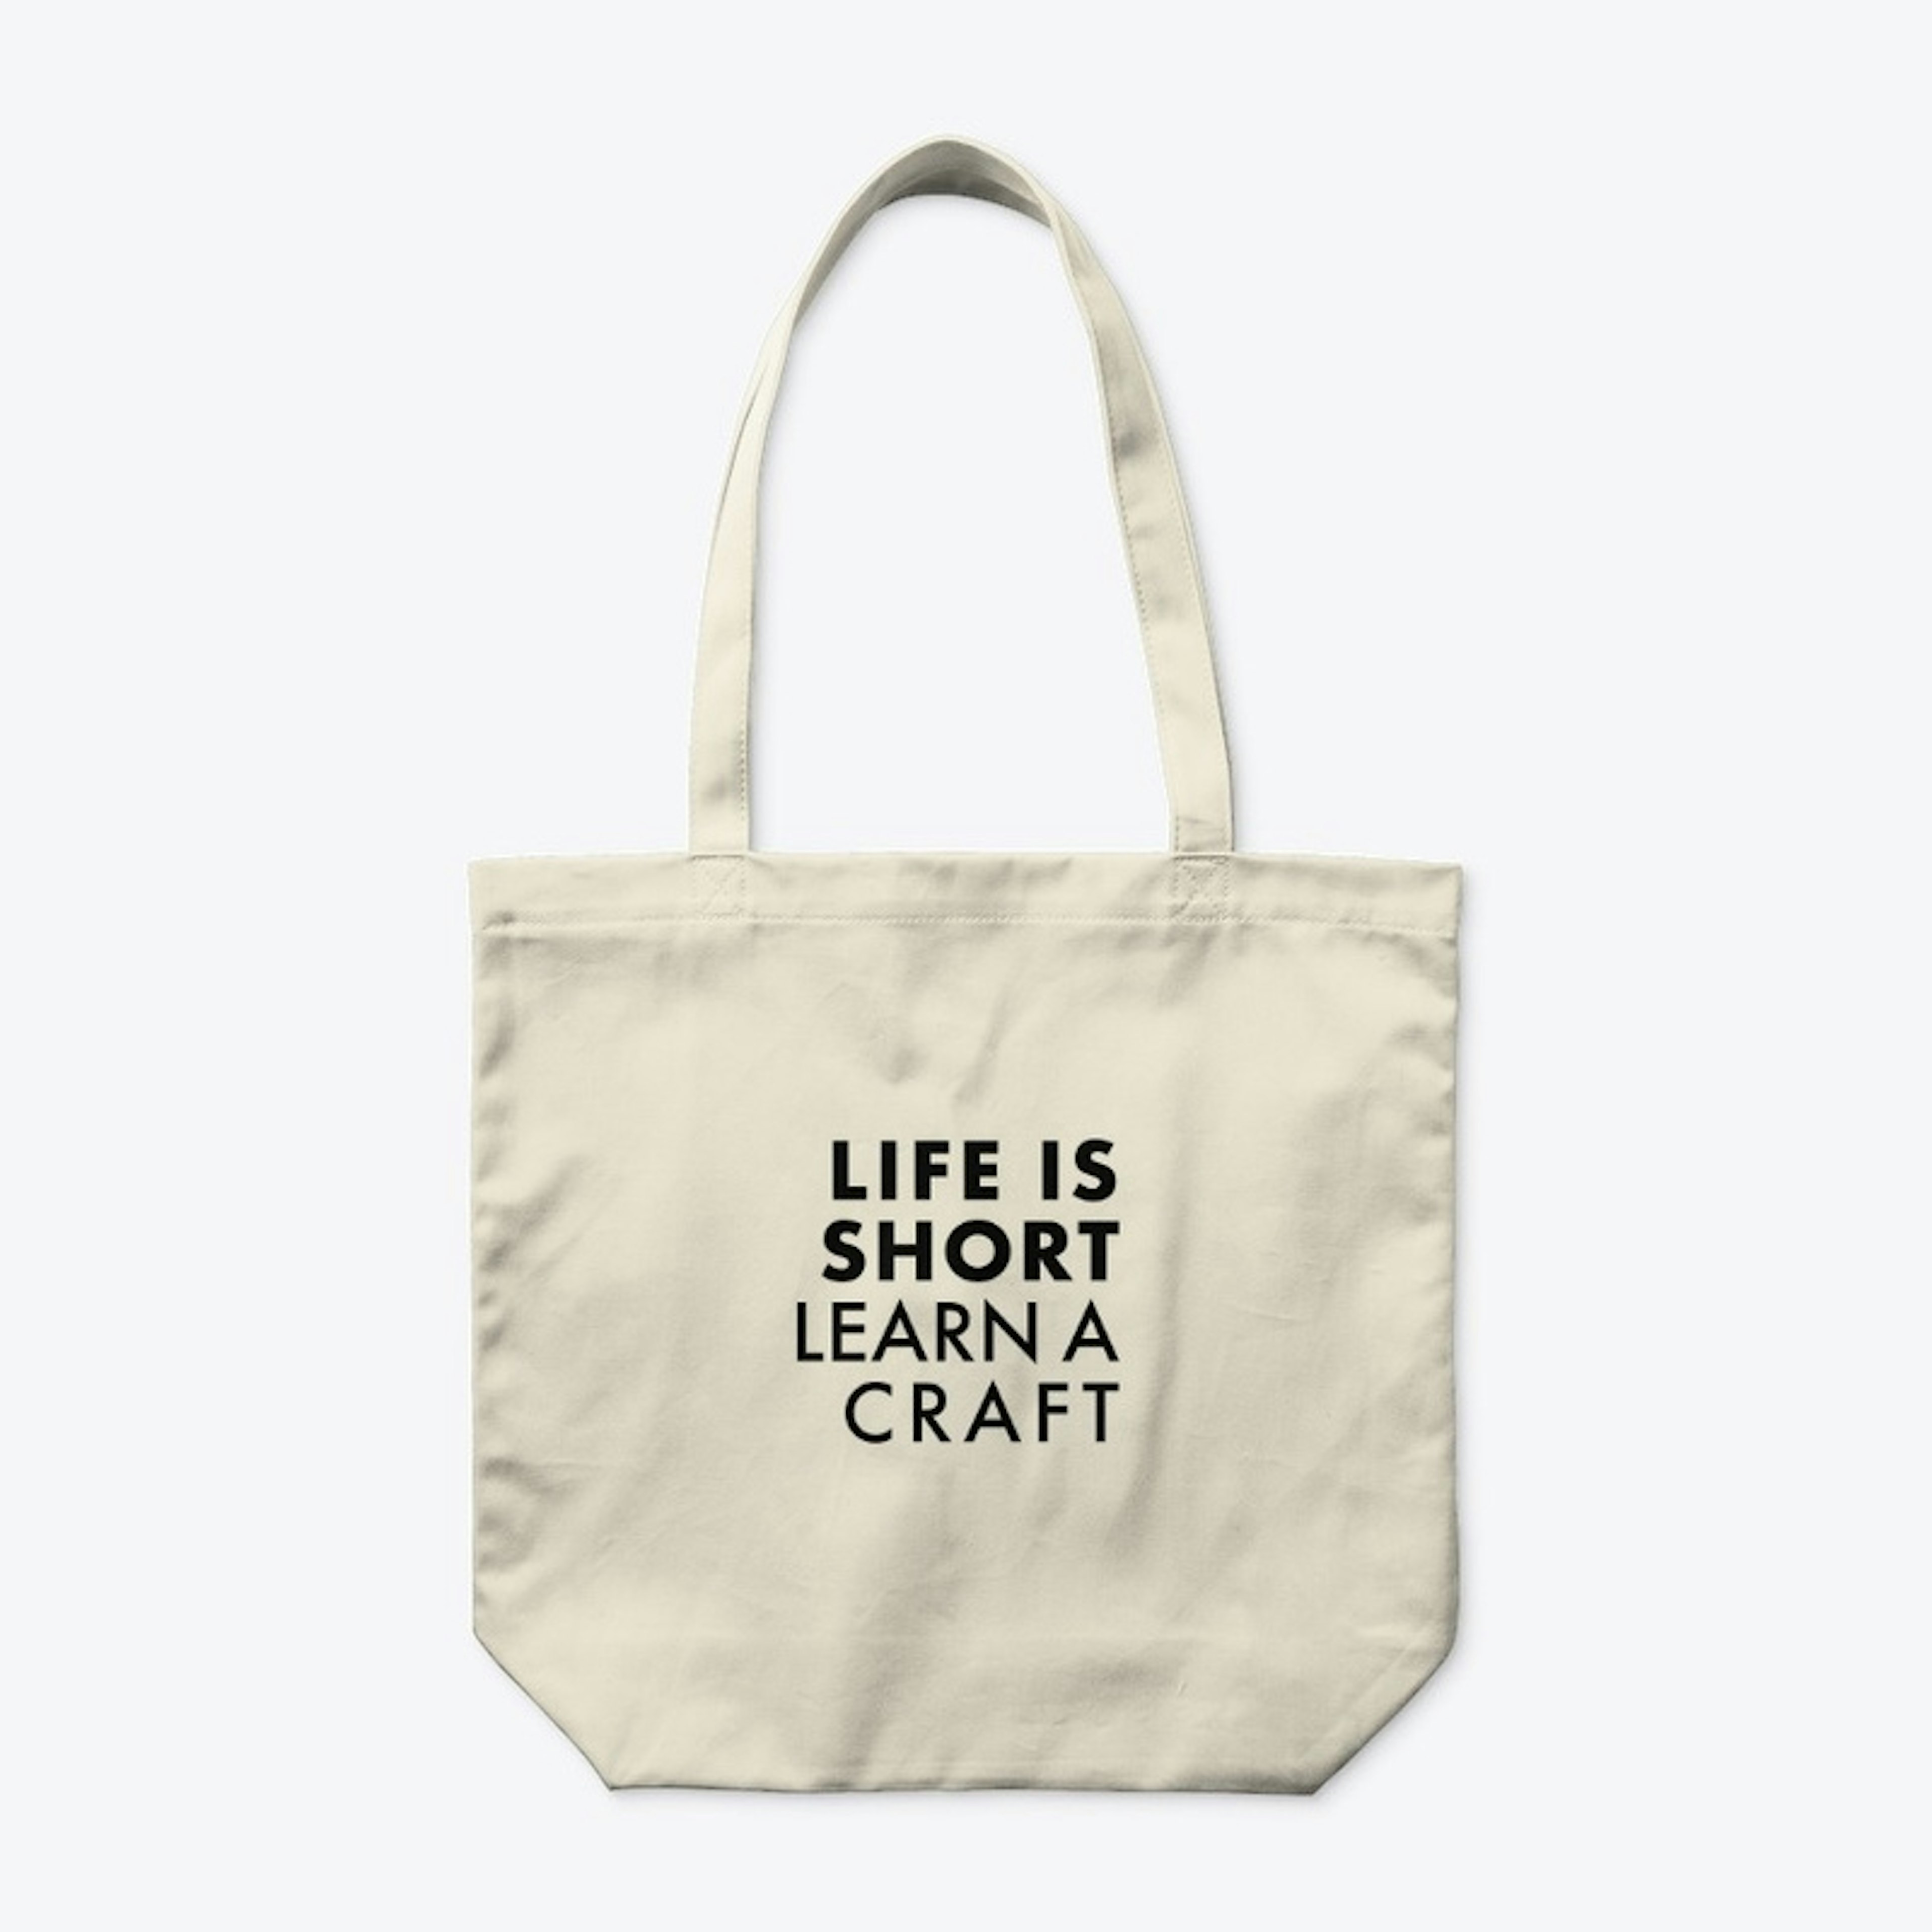 Life is short, learn a craft